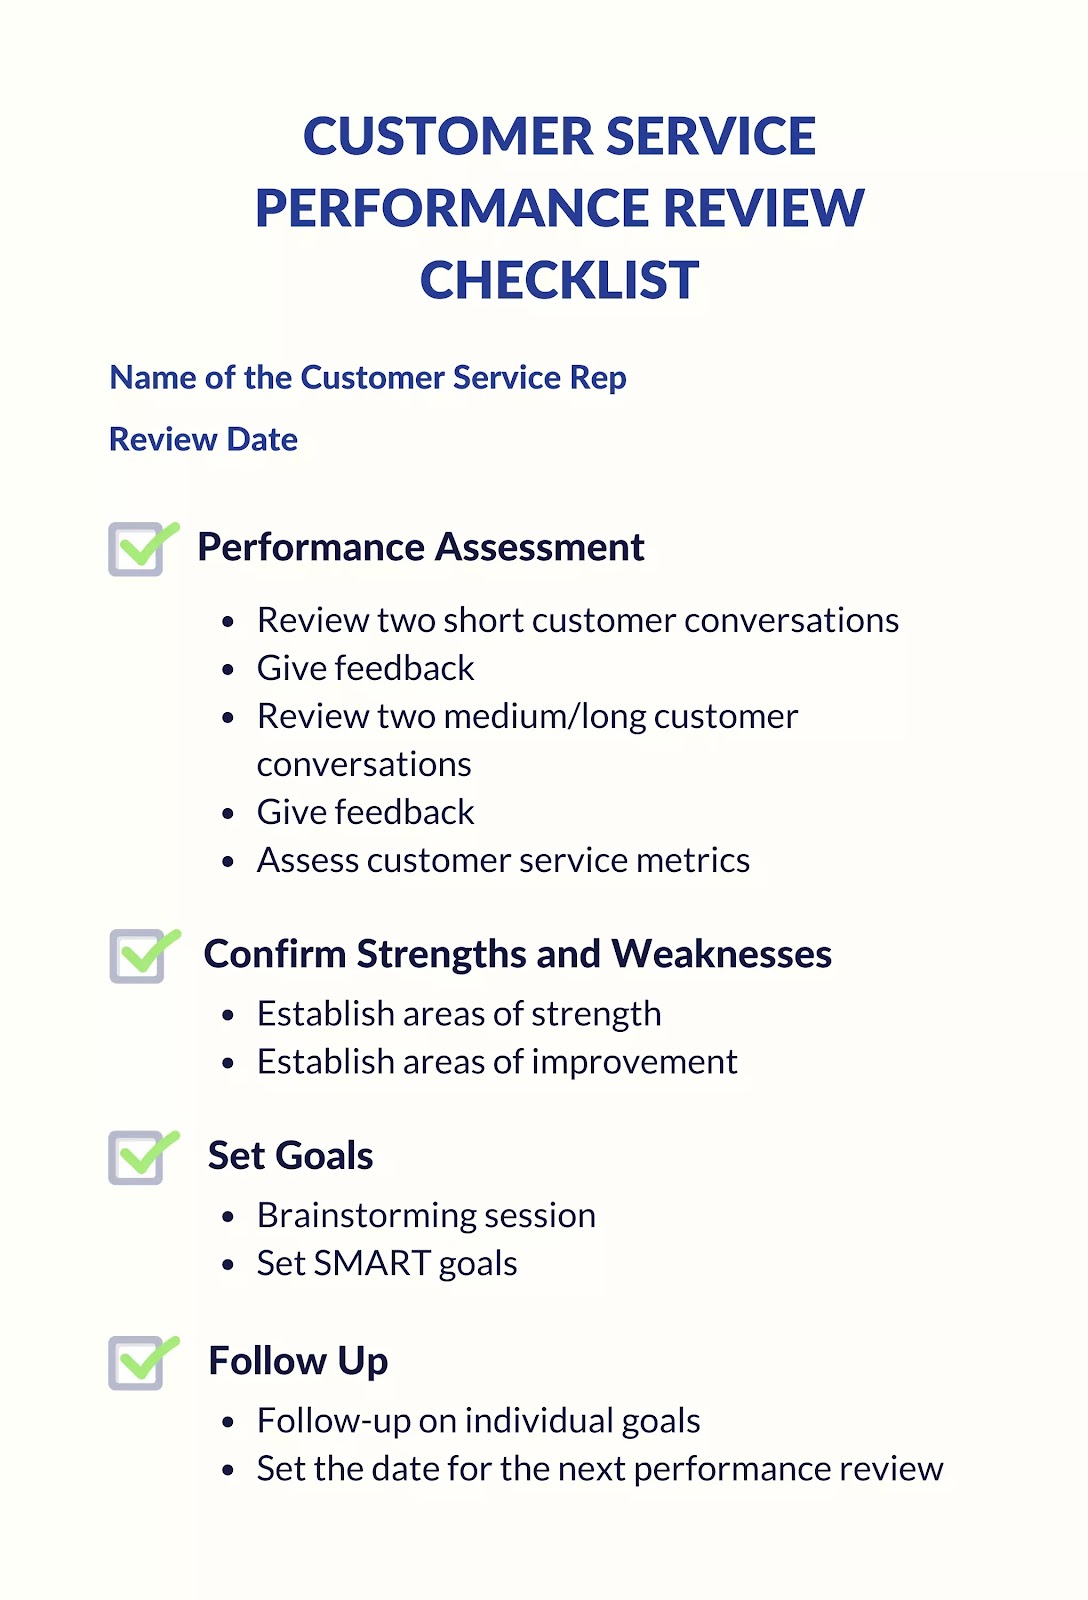 A simple customer service performance review checklist